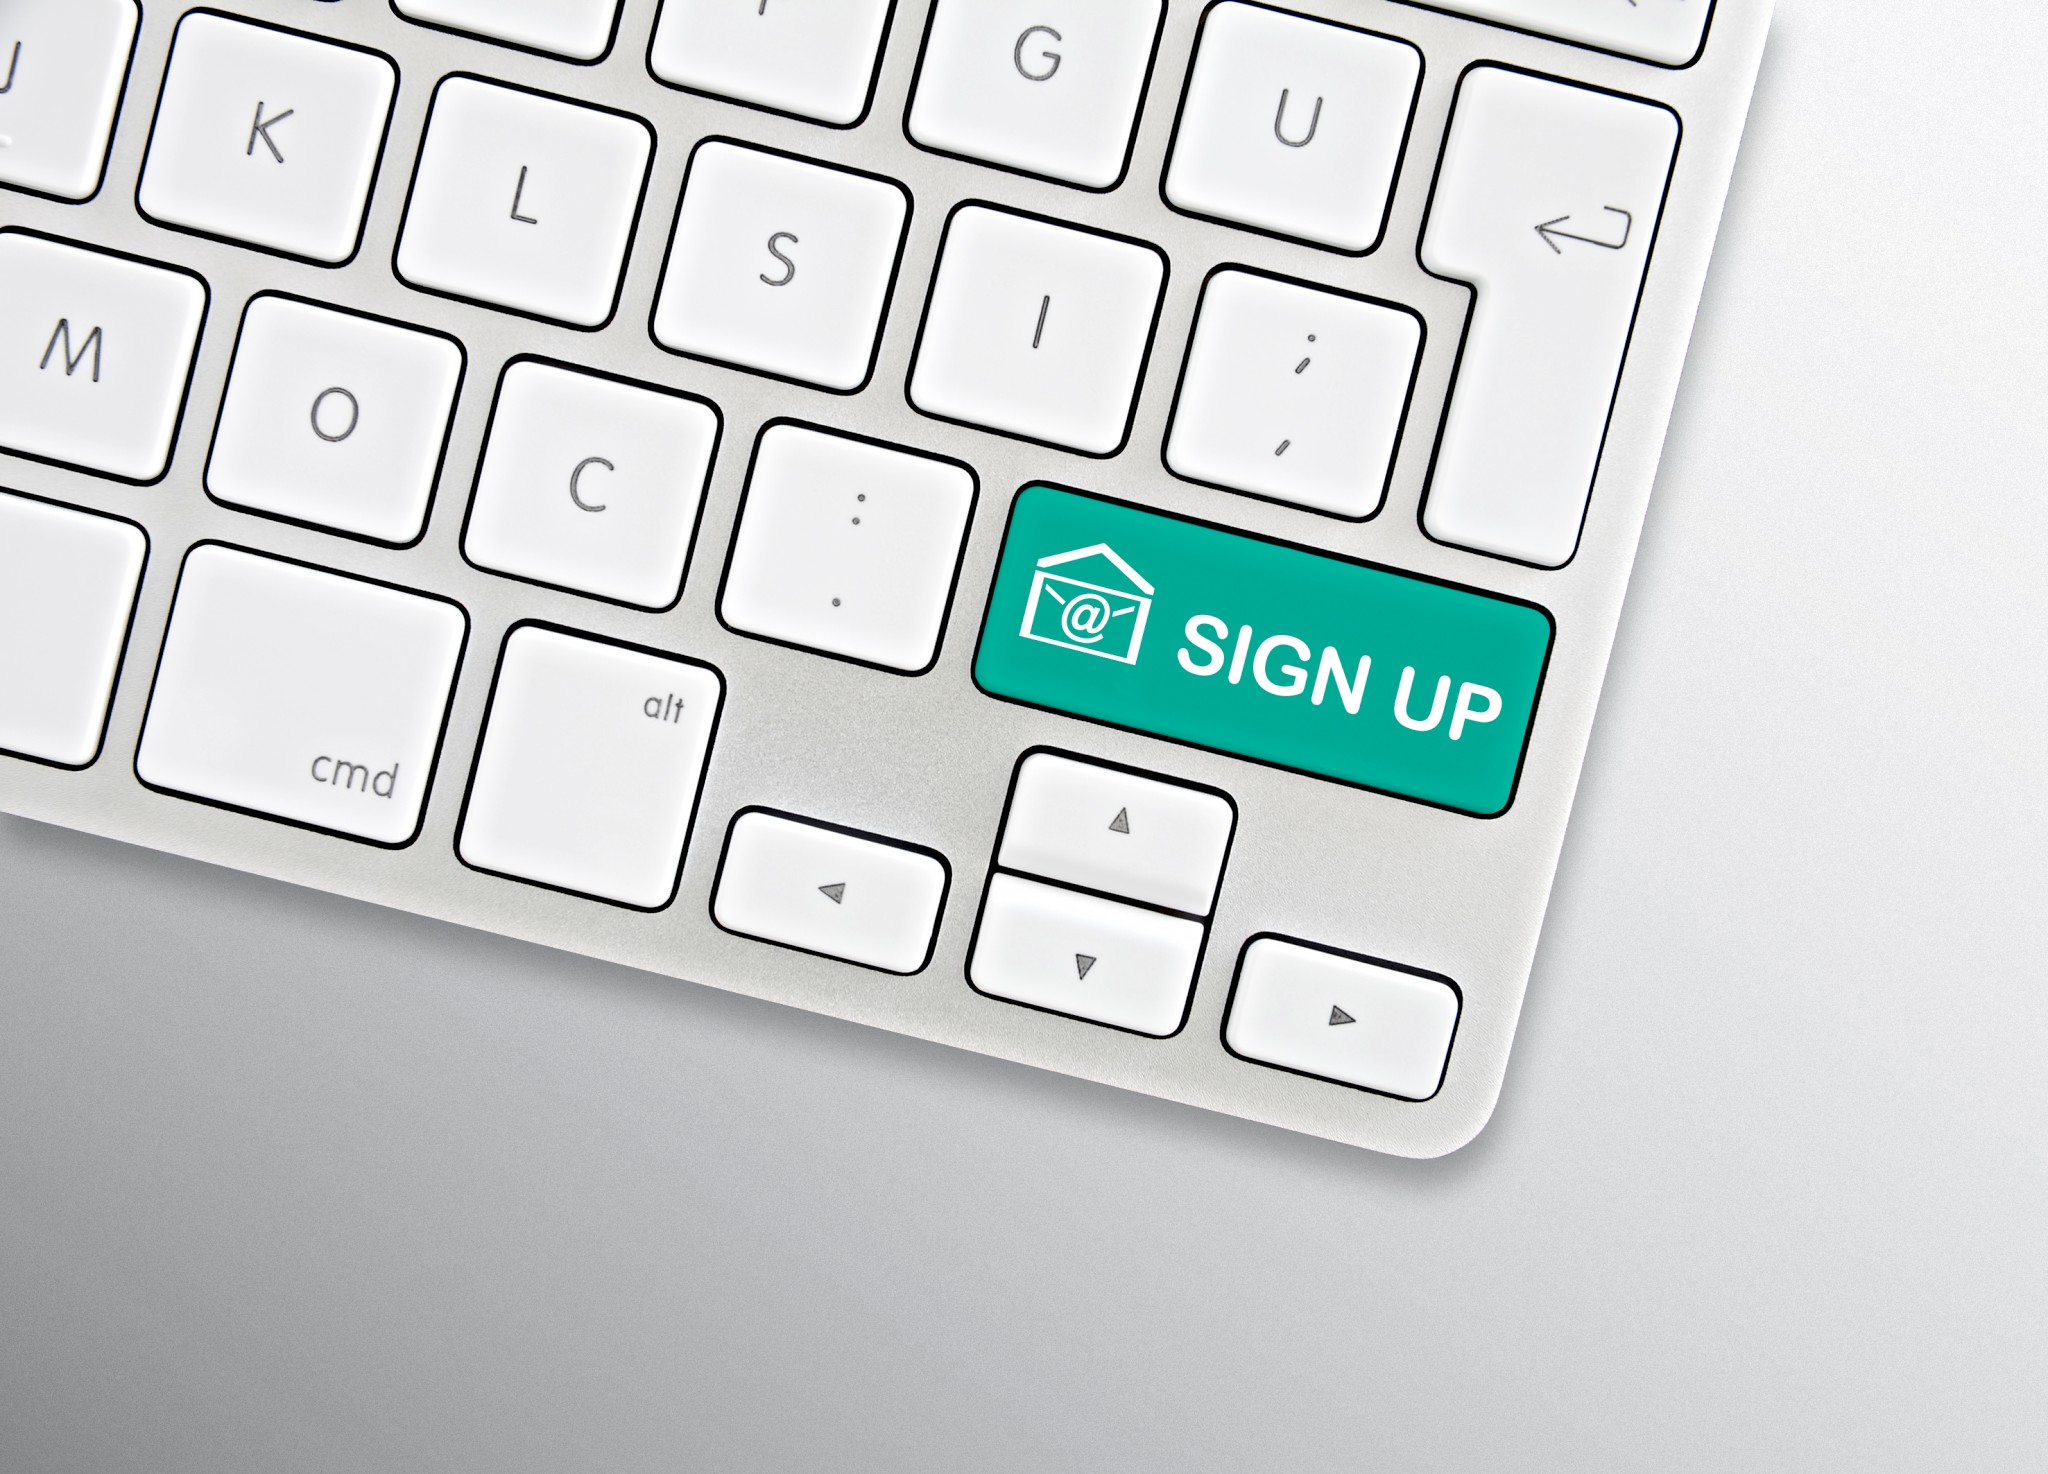 Sign up for emails icon shown on a key on a computer keyboard